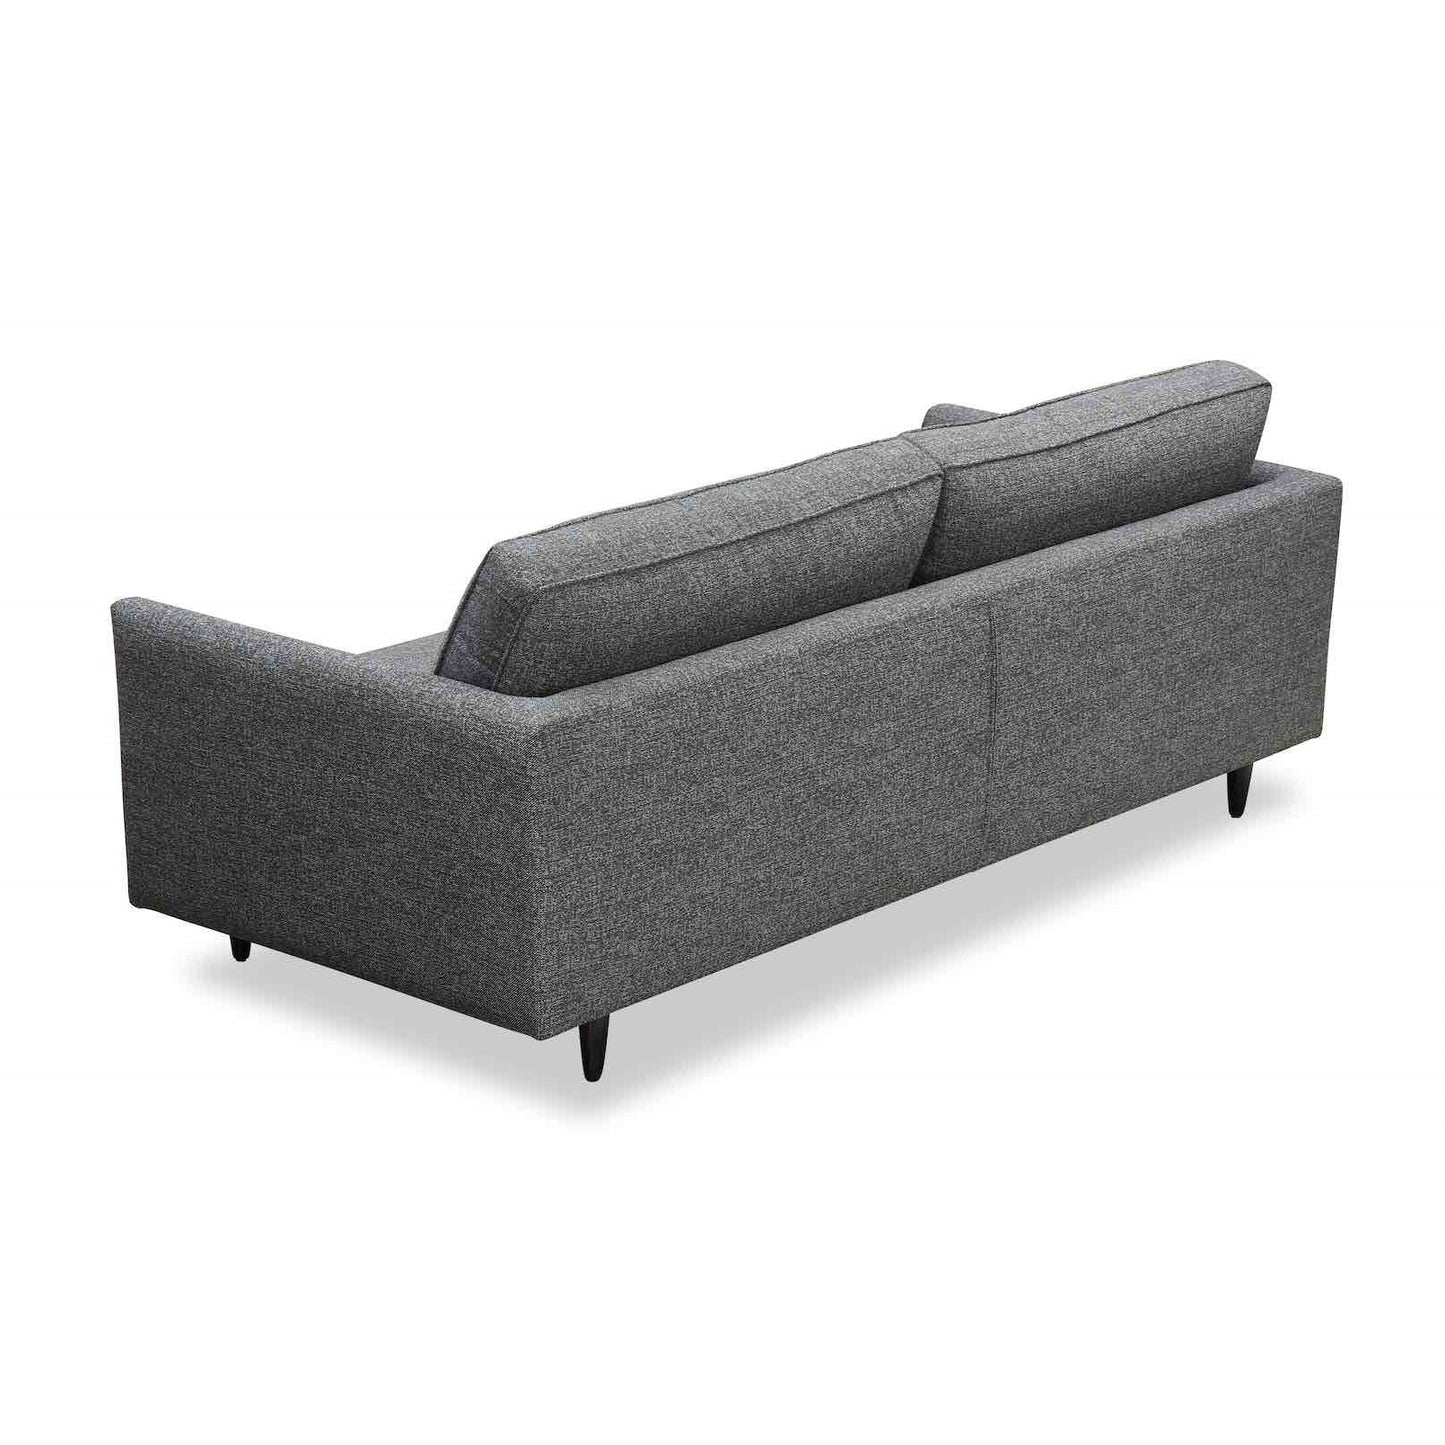 Polly Sofa by Molmic available from Make Your House A Home, Furniture Store located in Bendigo, Victoria. Australian Made in Melbourne.